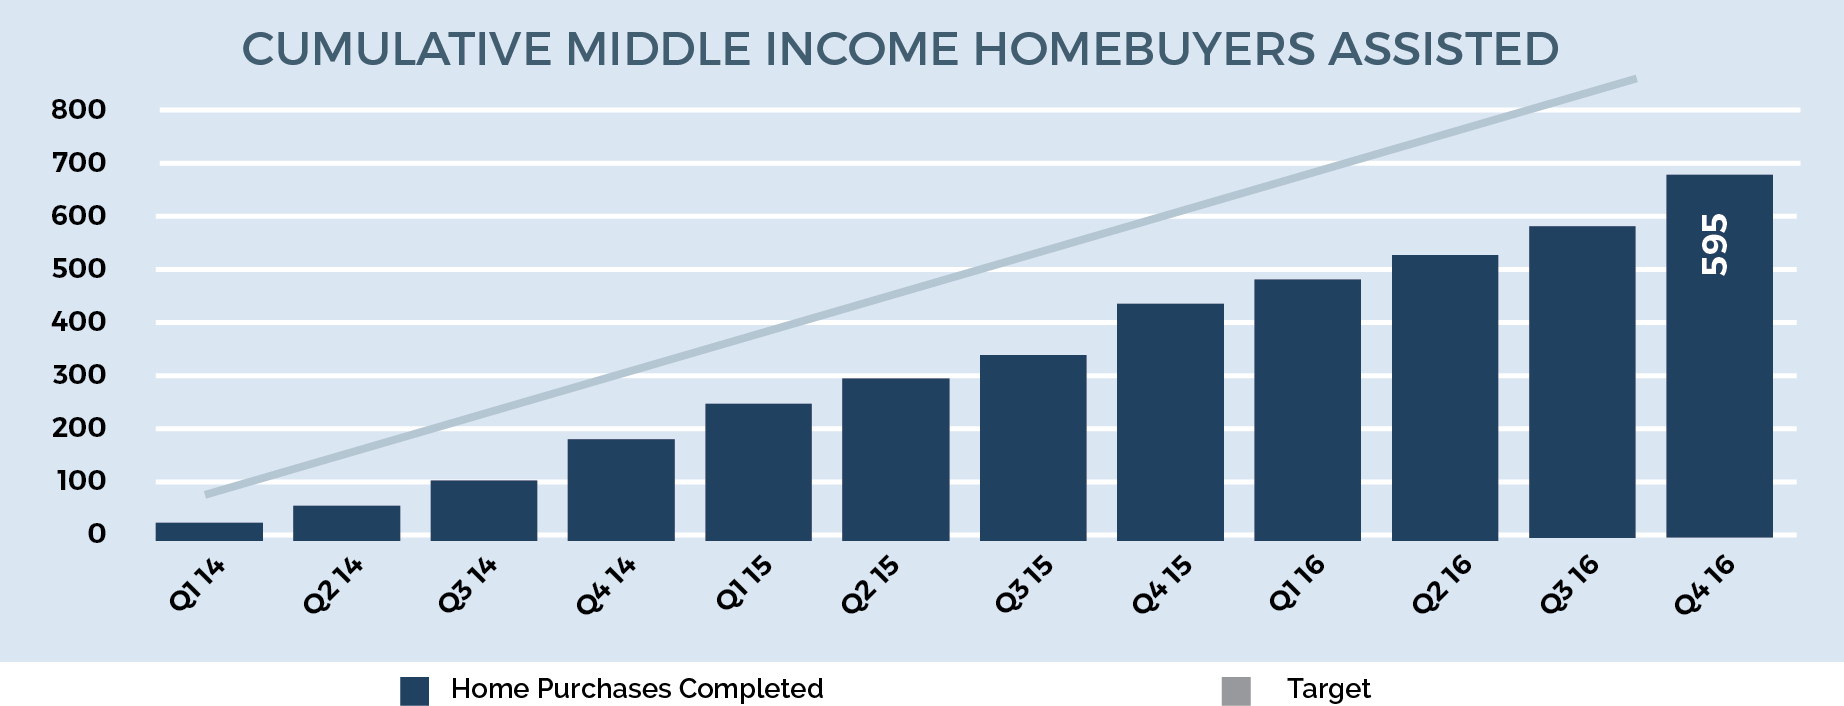 Image for boston 2030 yr2 cumulative middle income homebuyers assisted